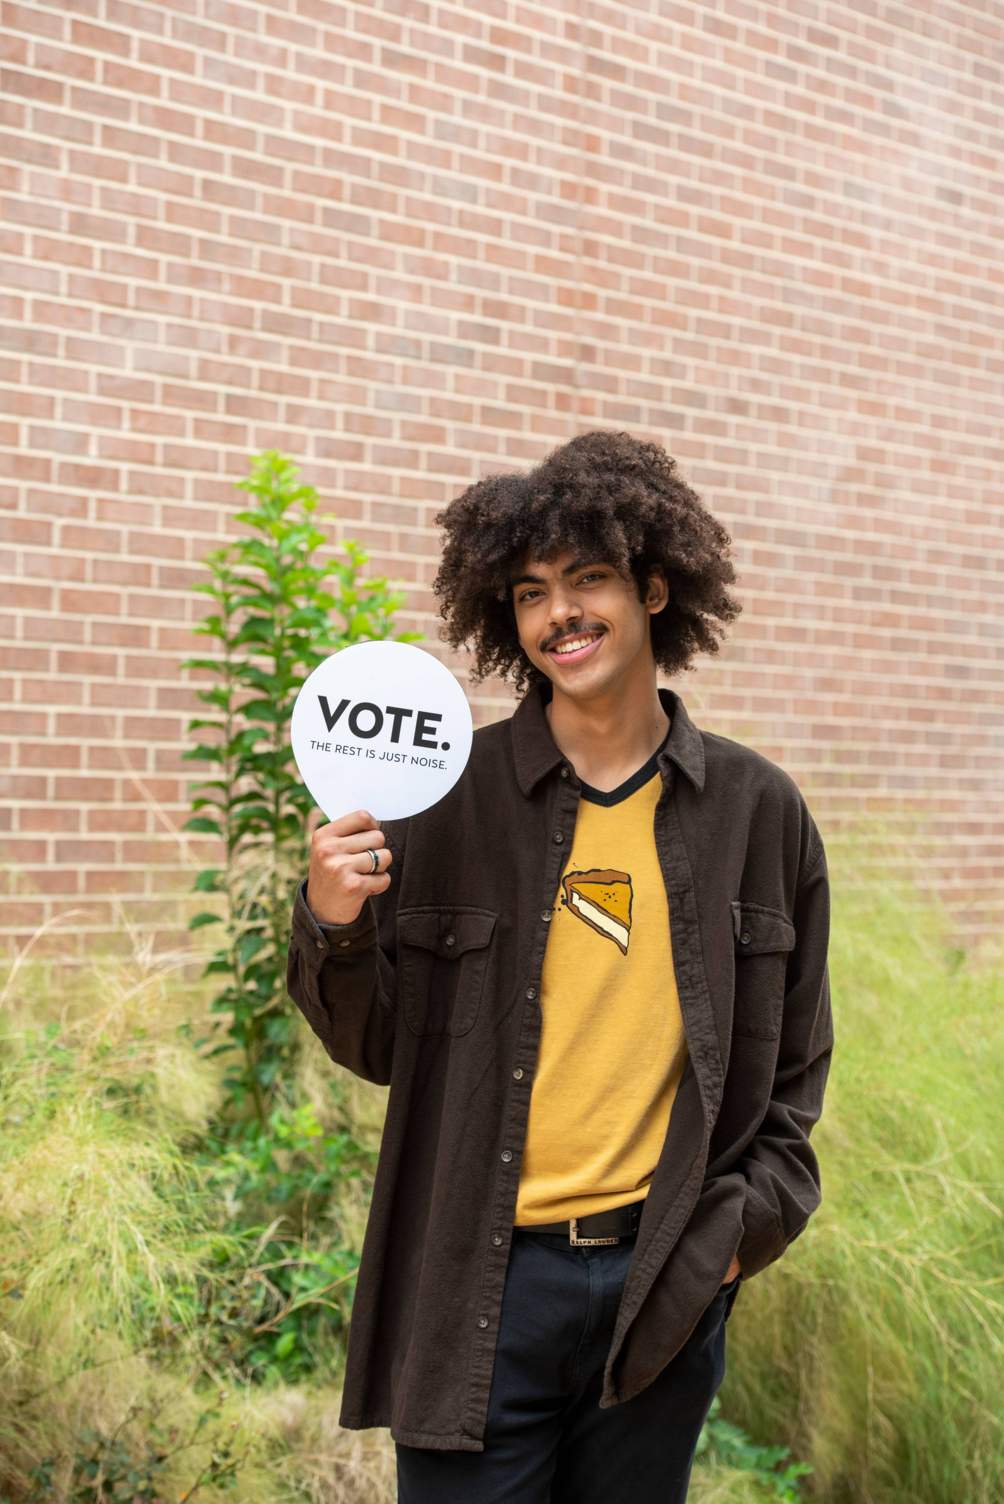 Samuel Nieves holding a "vote" sign